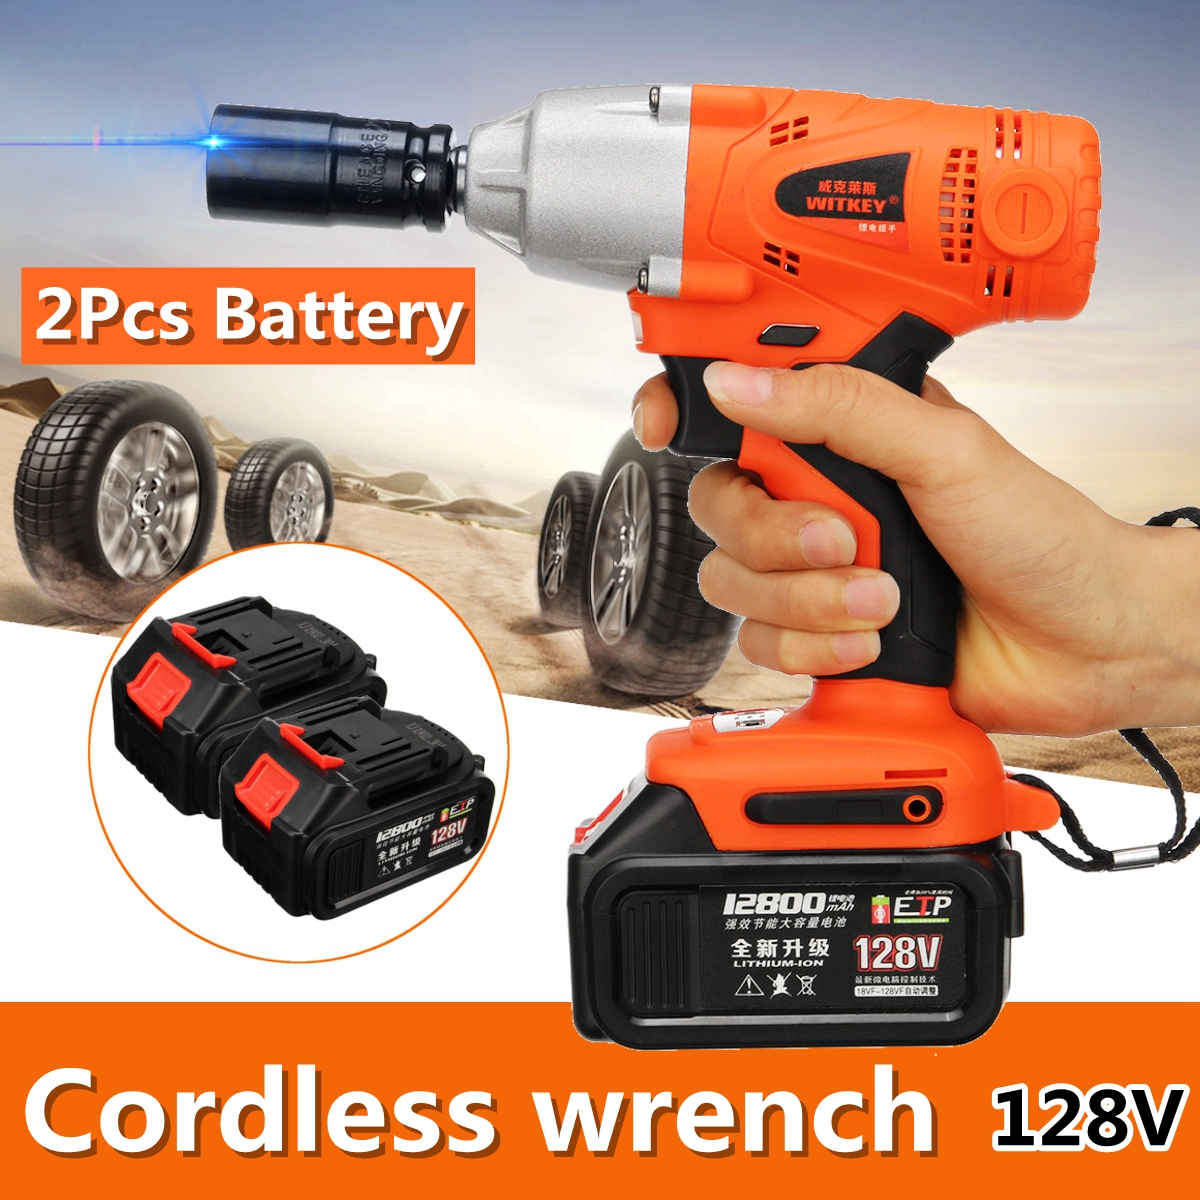 WK-128Y-2 128V Cordless Power Wrench Brush 520Nm Torque Electric Wrench Power Tools